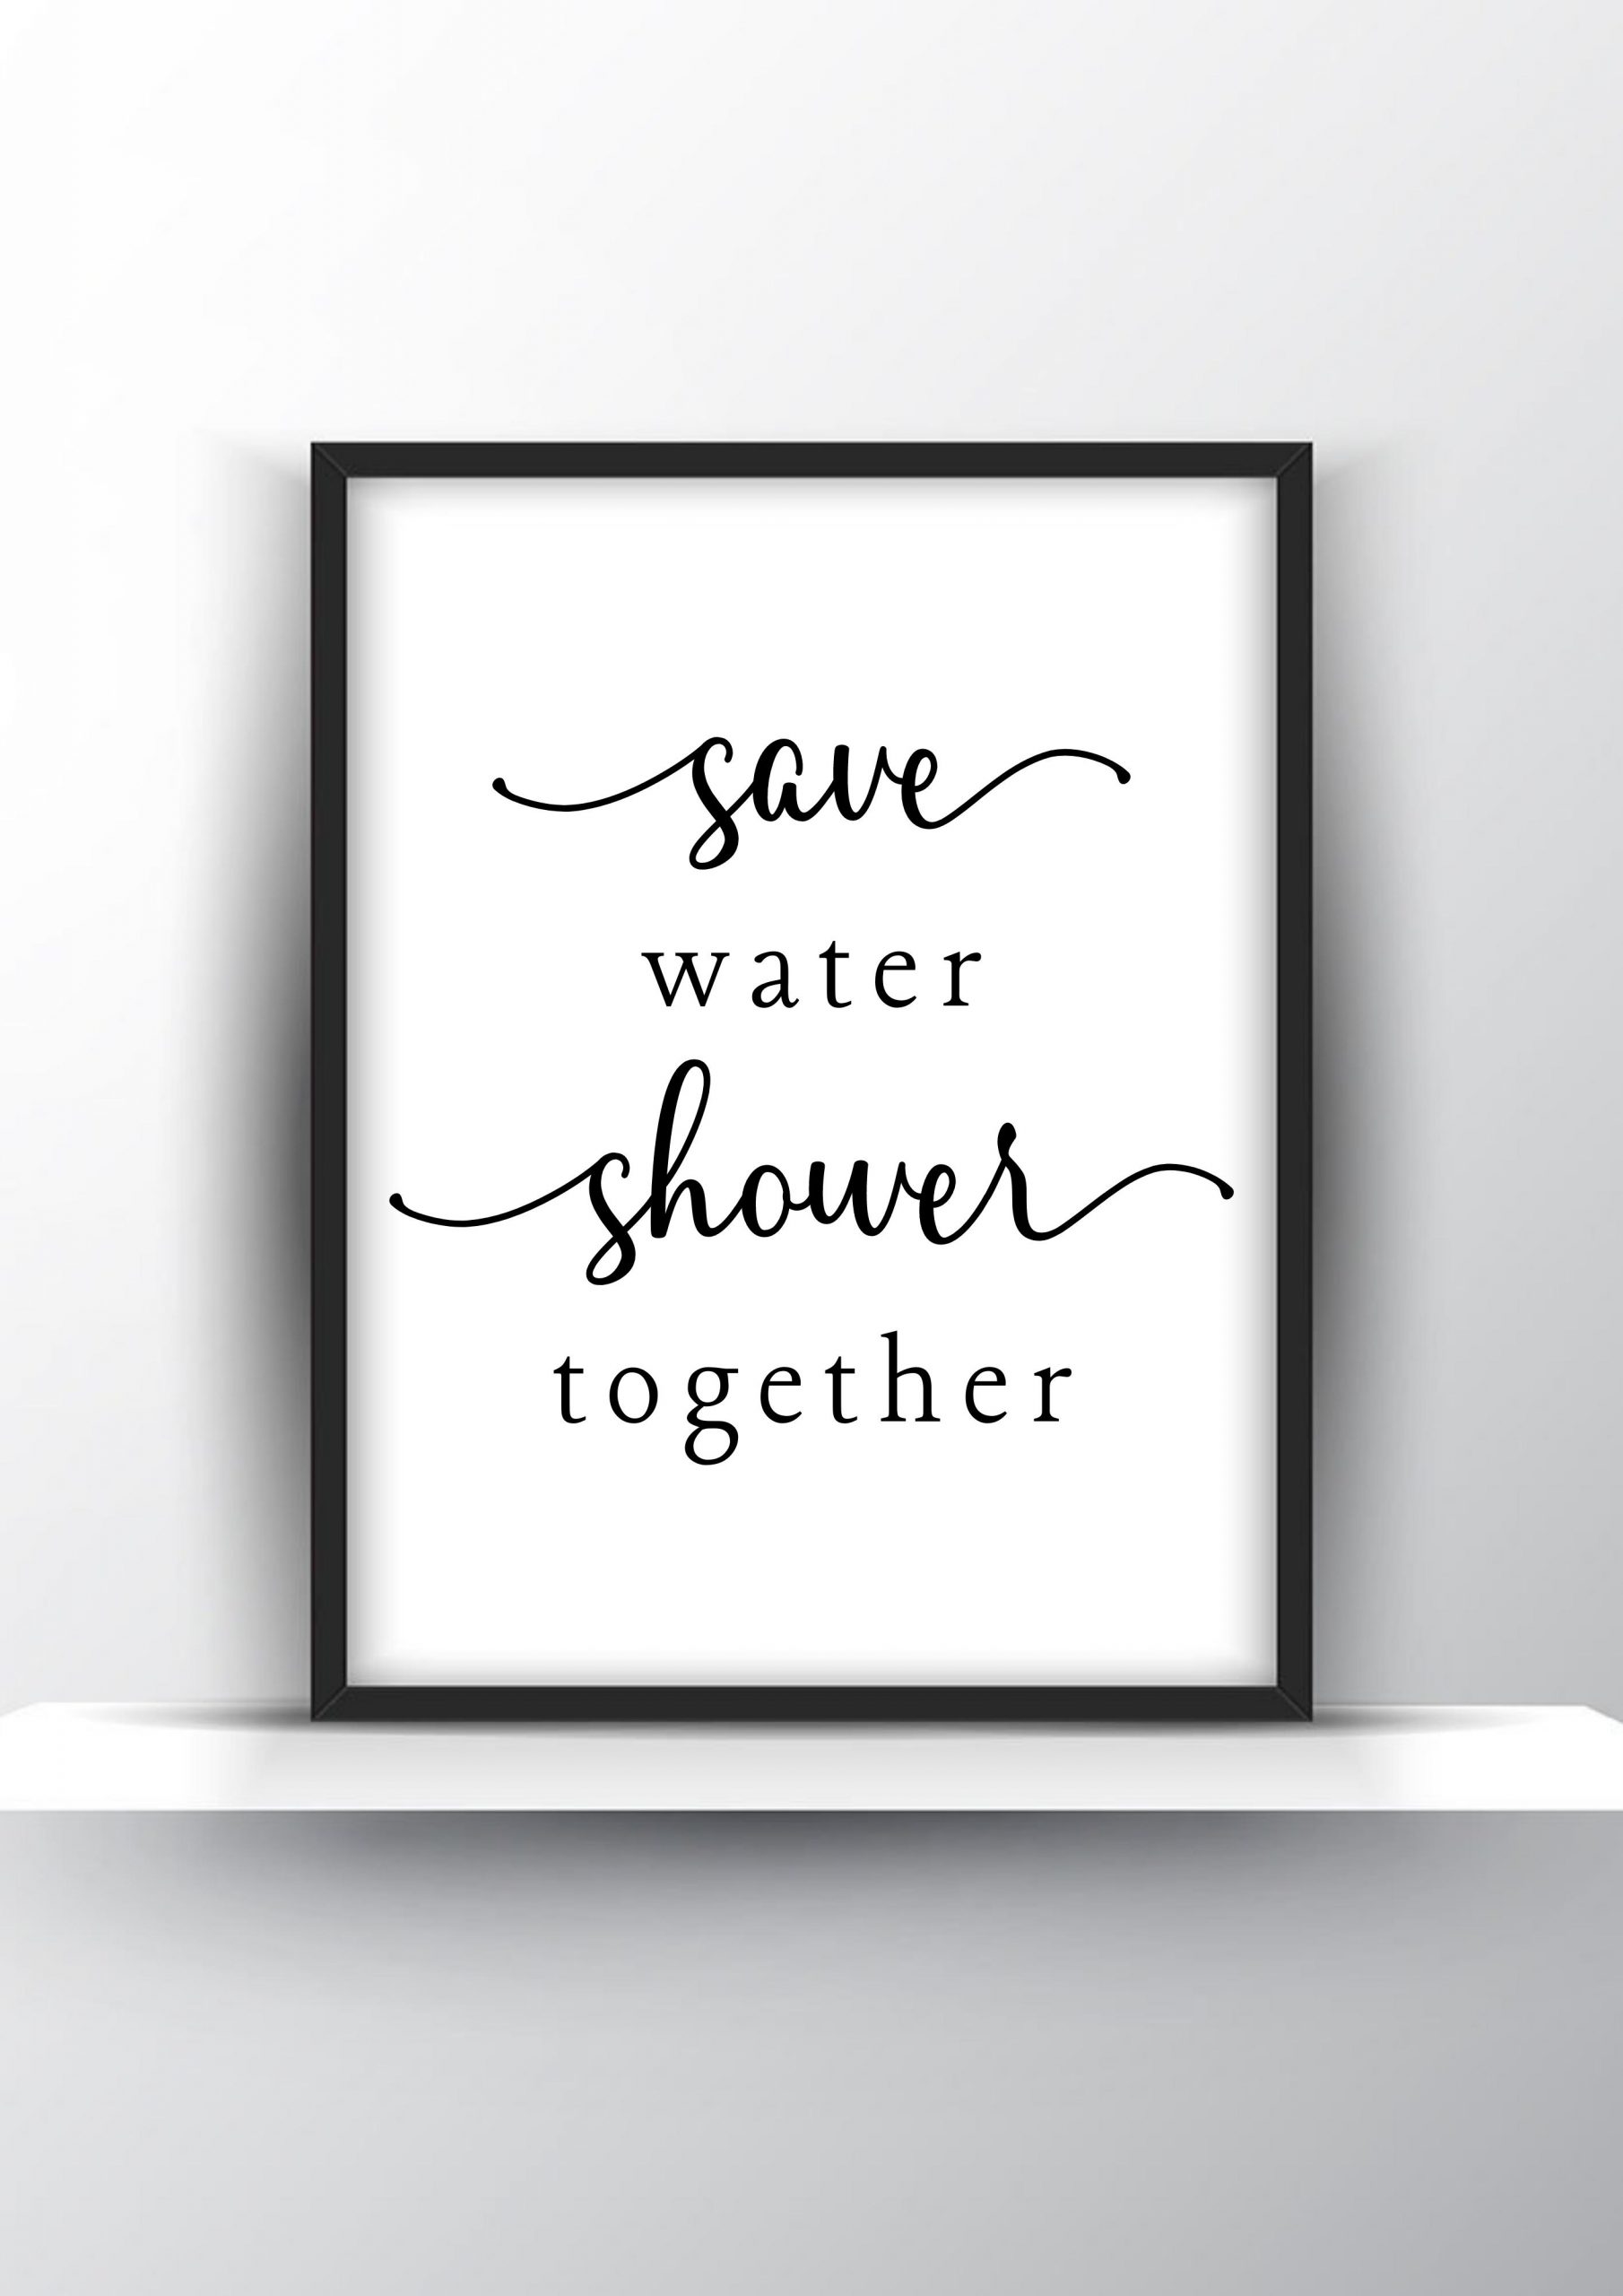 Save water shower together Unframed and Framed Wall Art Poster Print